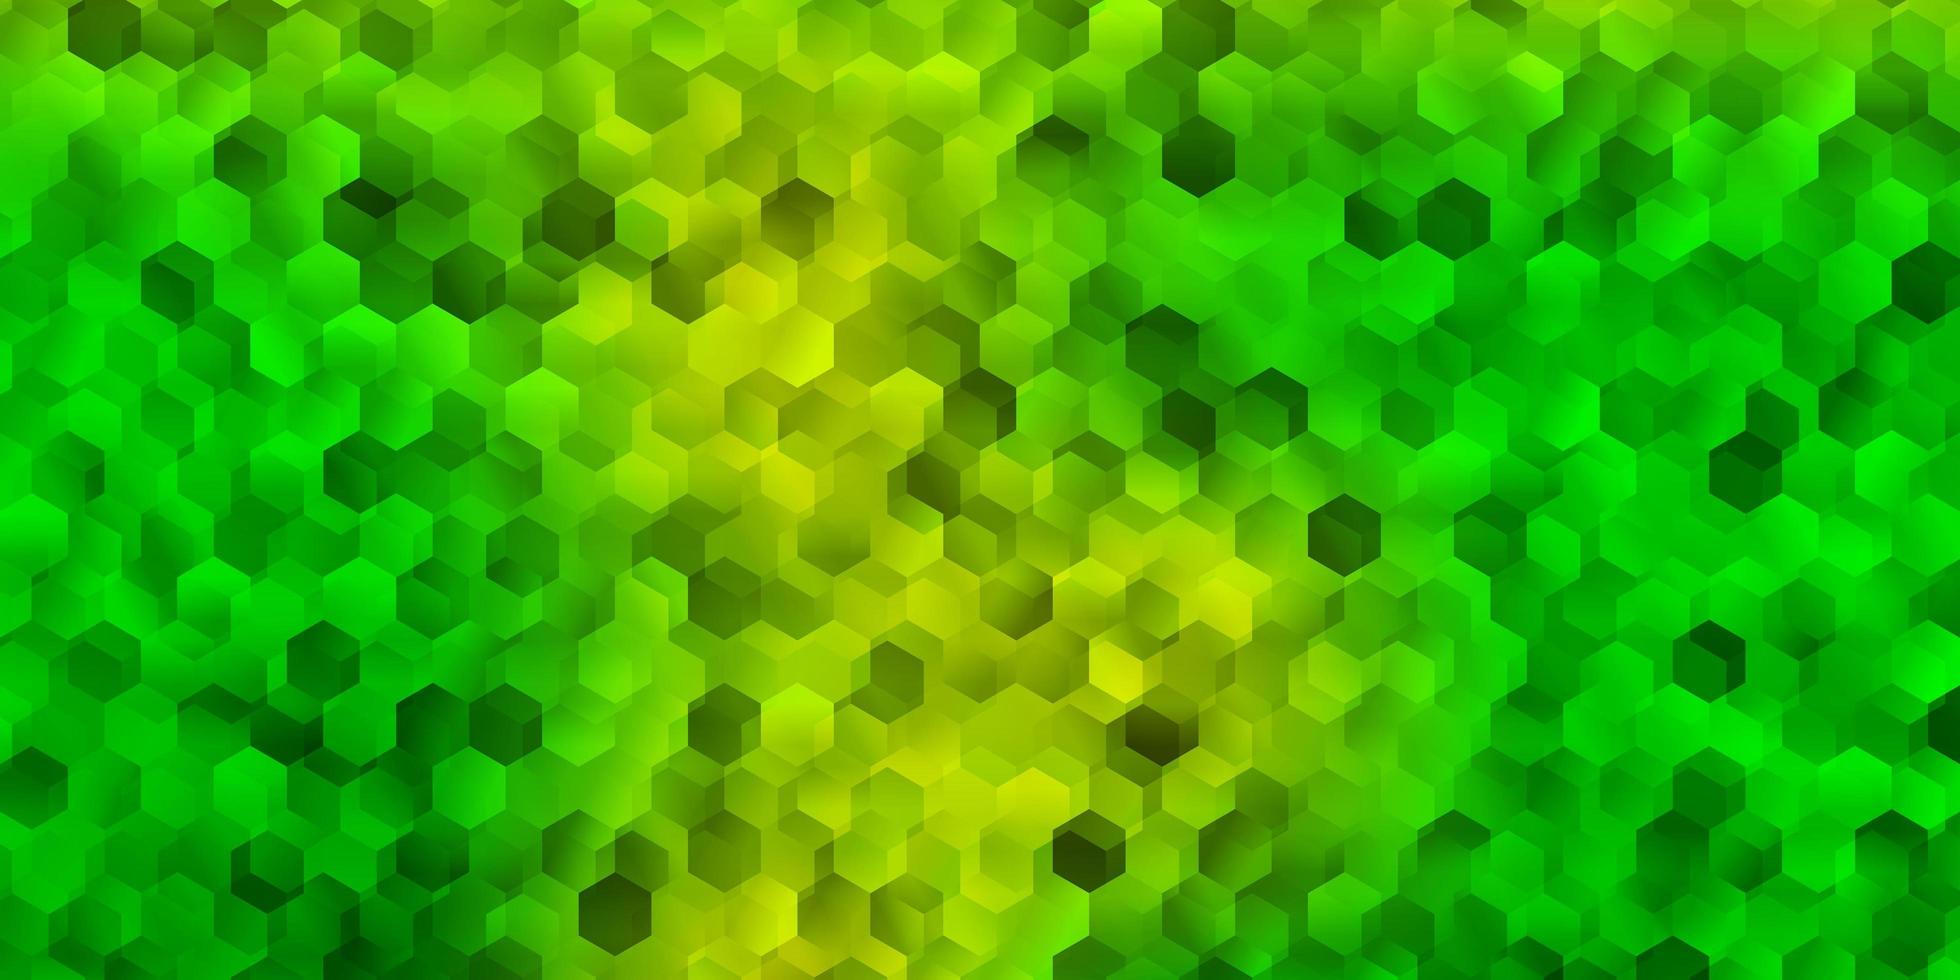 Light green yellow vector pattern with hexagons